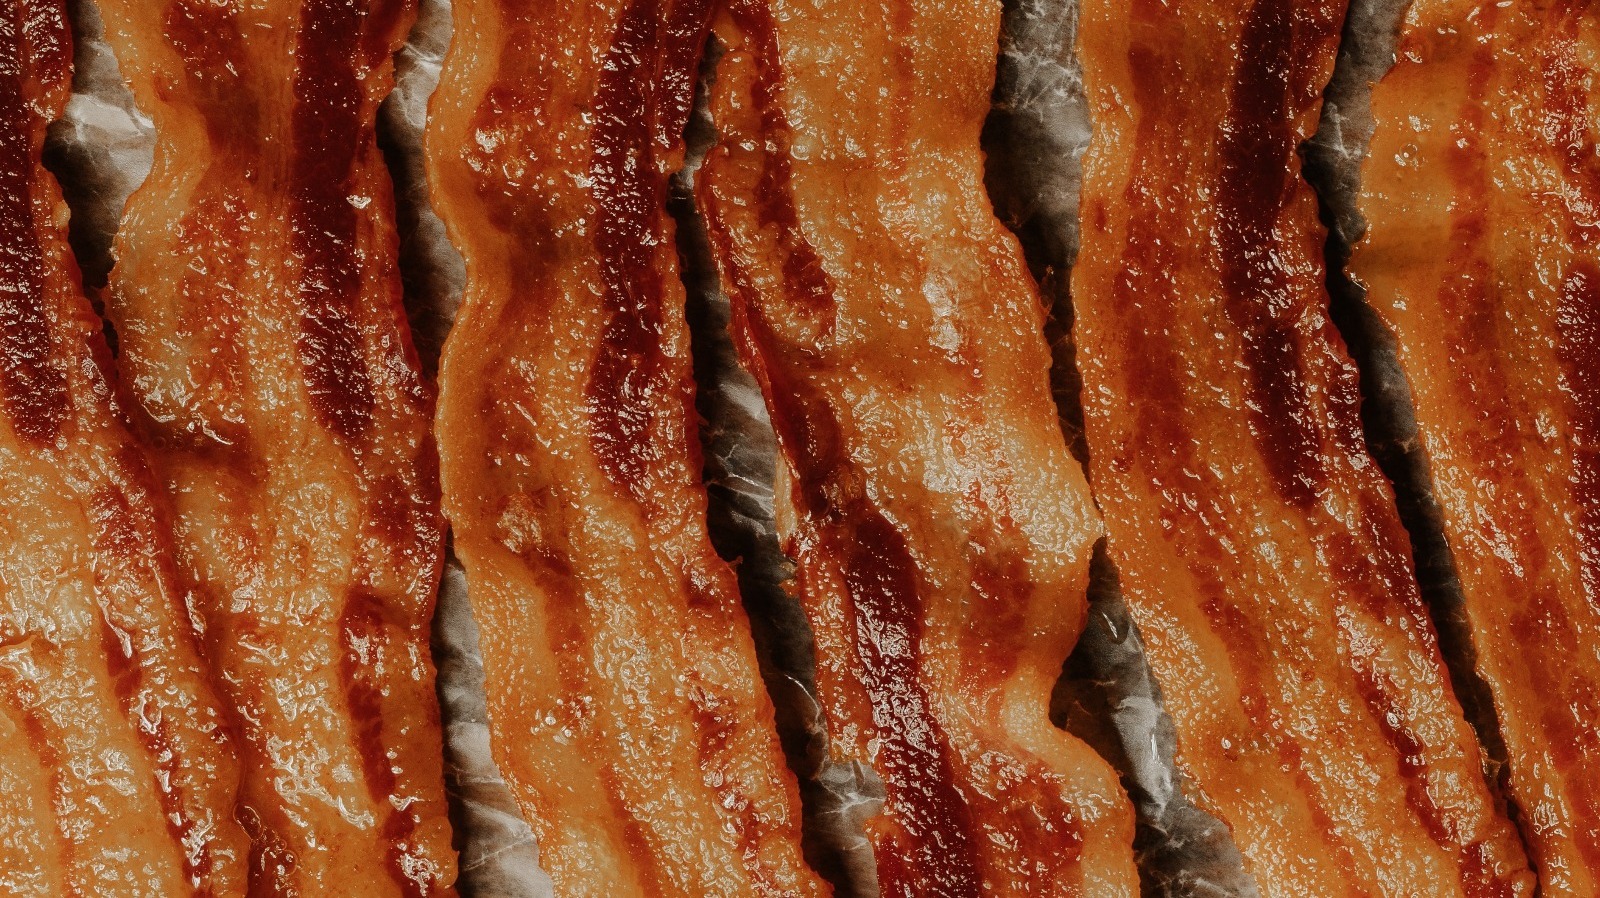 How To Tell If Bacon Has Gone Bad